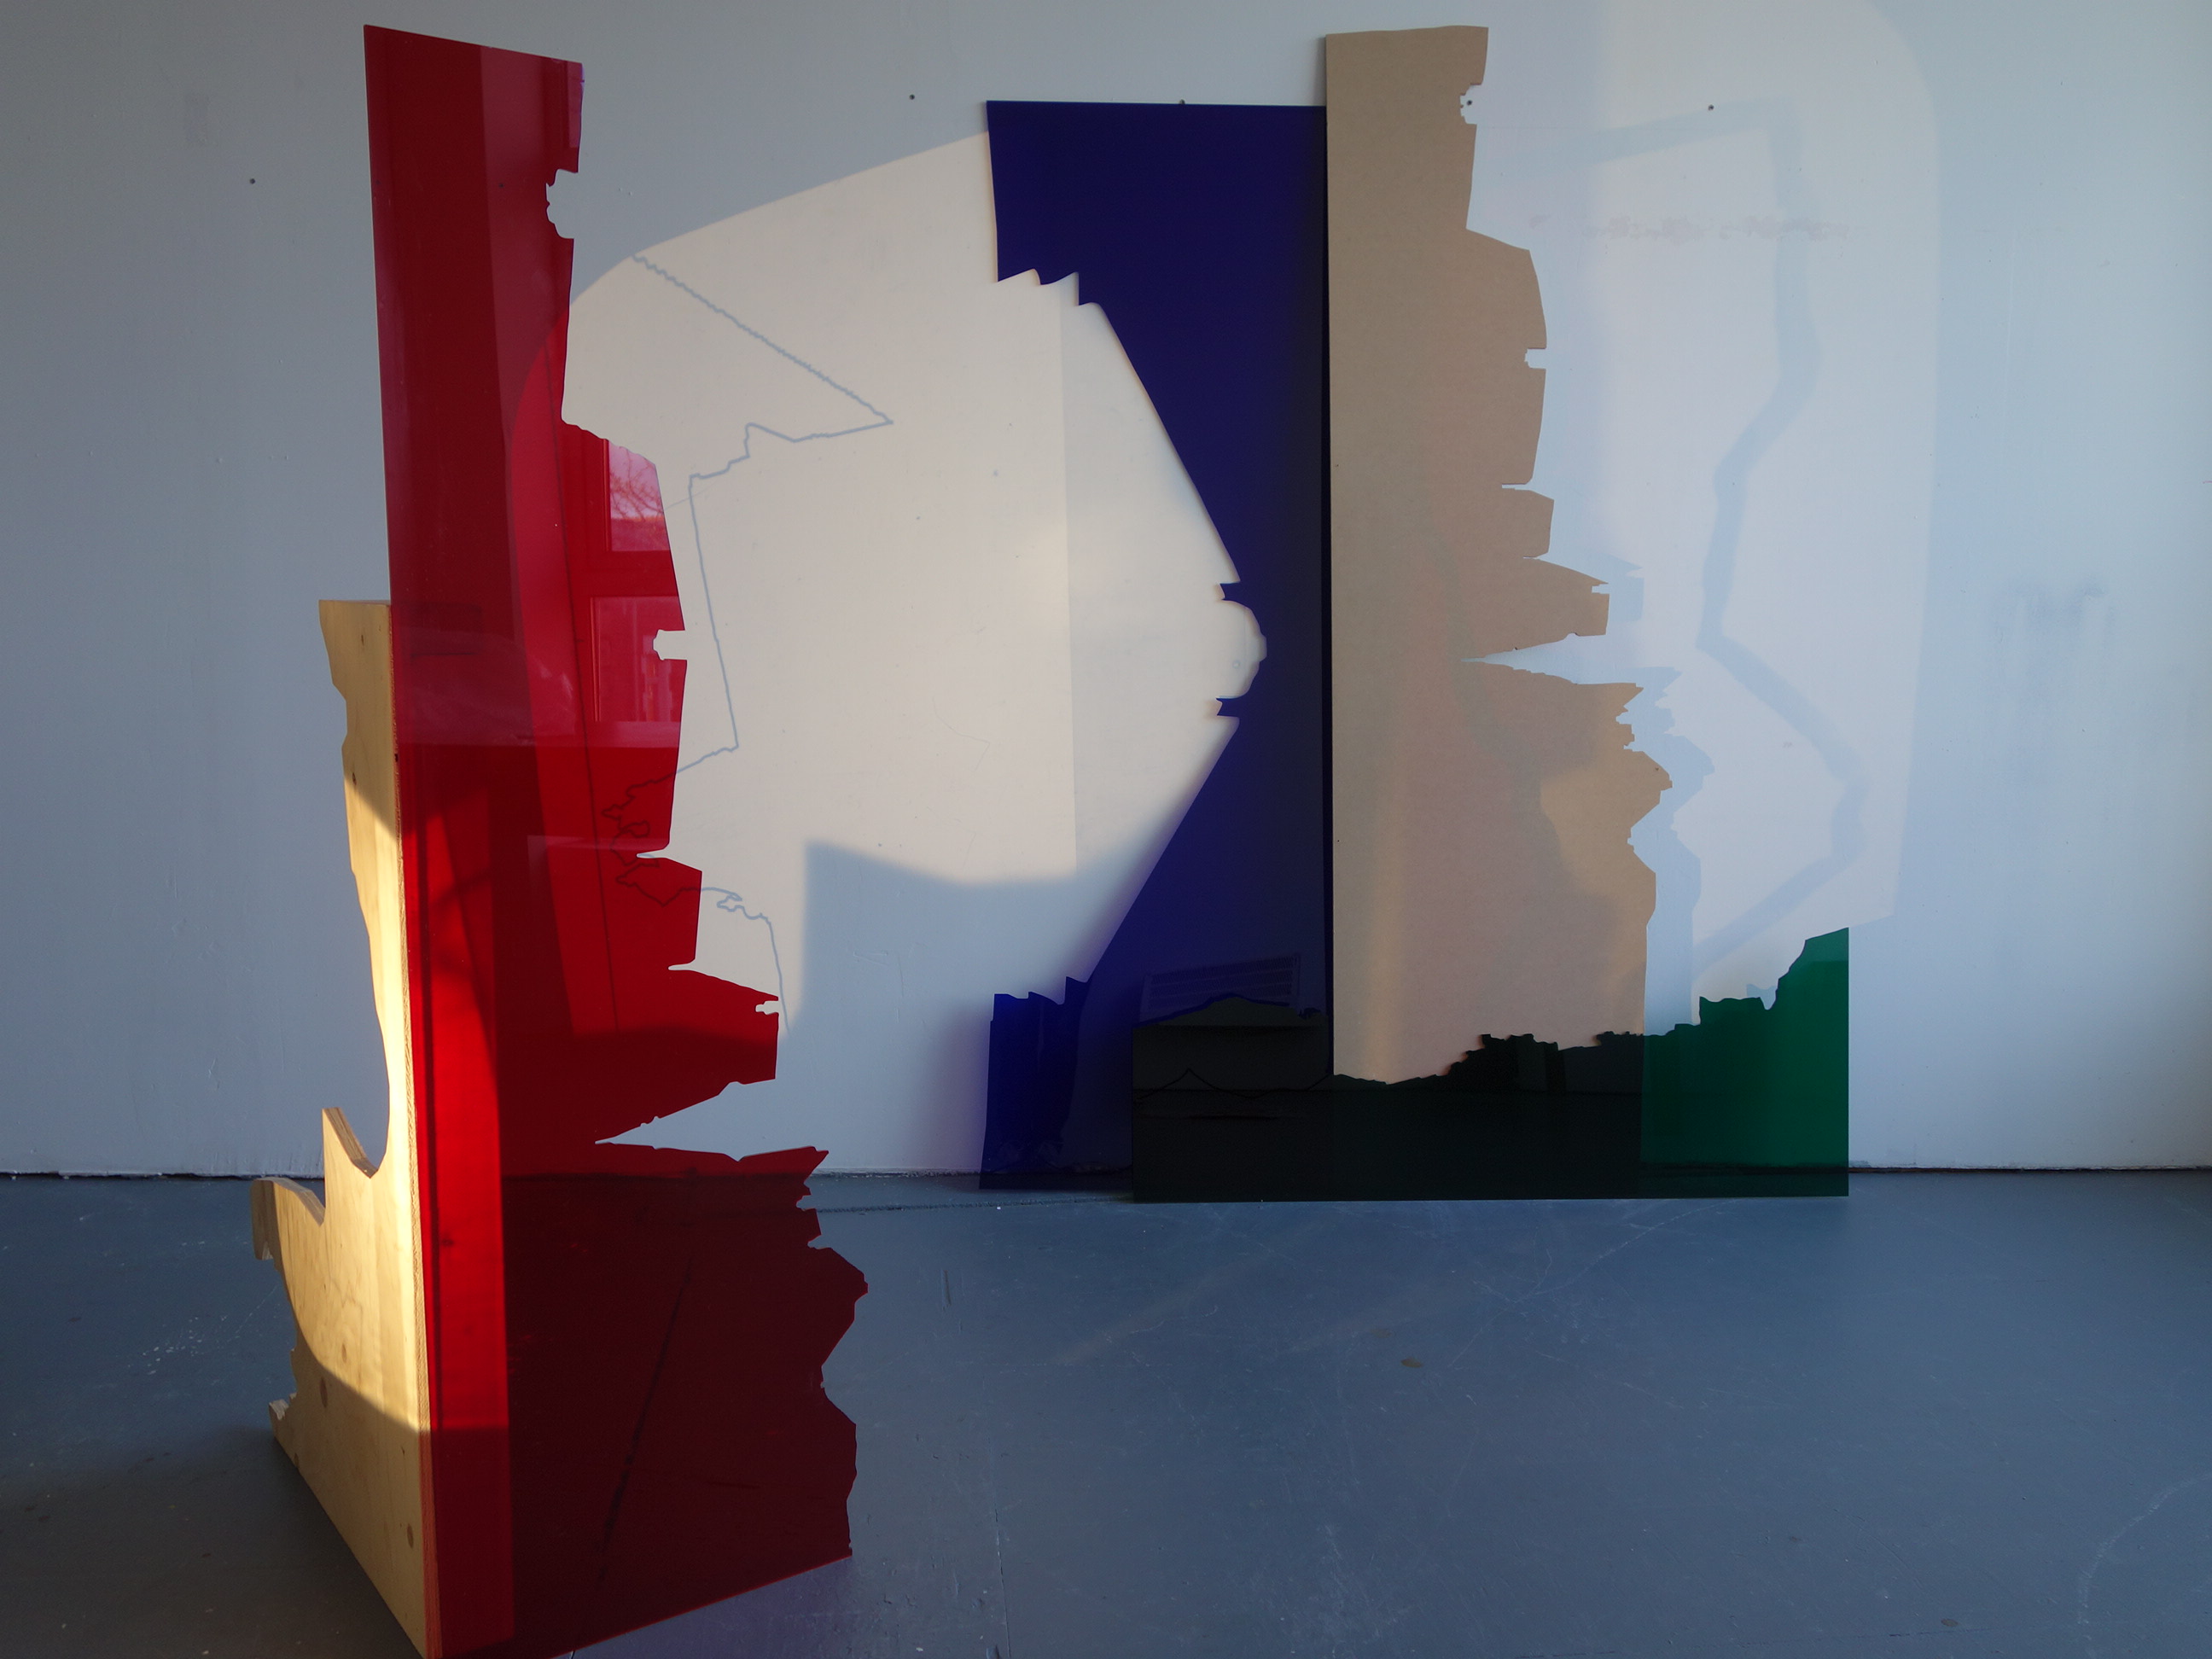 Holly
                                                          Davey, The
                                                          Conversation,
                                                          Plywood,
                                                          perspex and
                                                          acetate
                                                          projection,
                                                          Studio
                                                          research,
                                                          2019